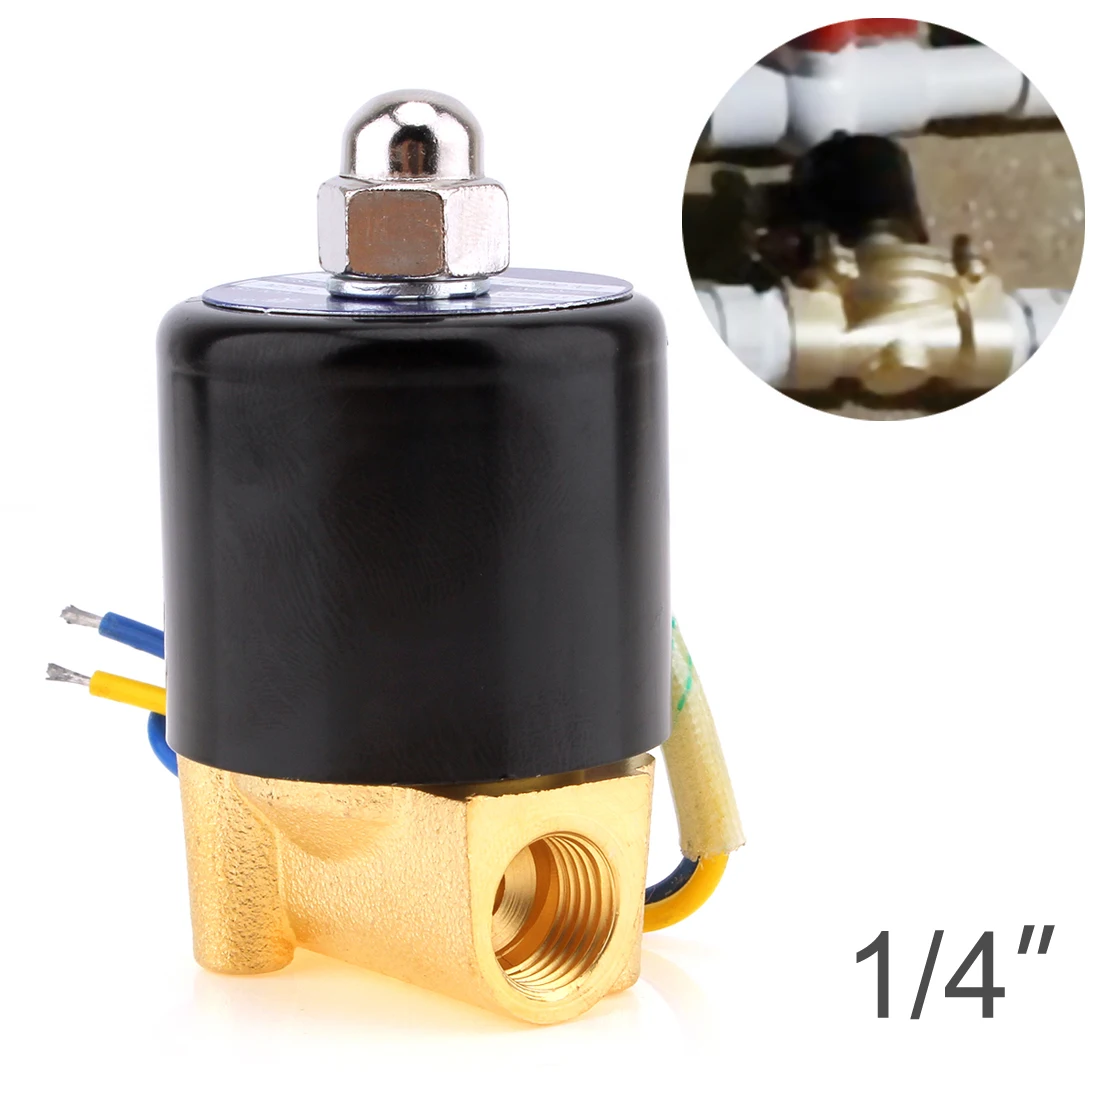 

Solenoid Valve DC 12V 1/4" NPT N/C Brass Normally Closed Electric Valves for Water Oil Air gas Fuels